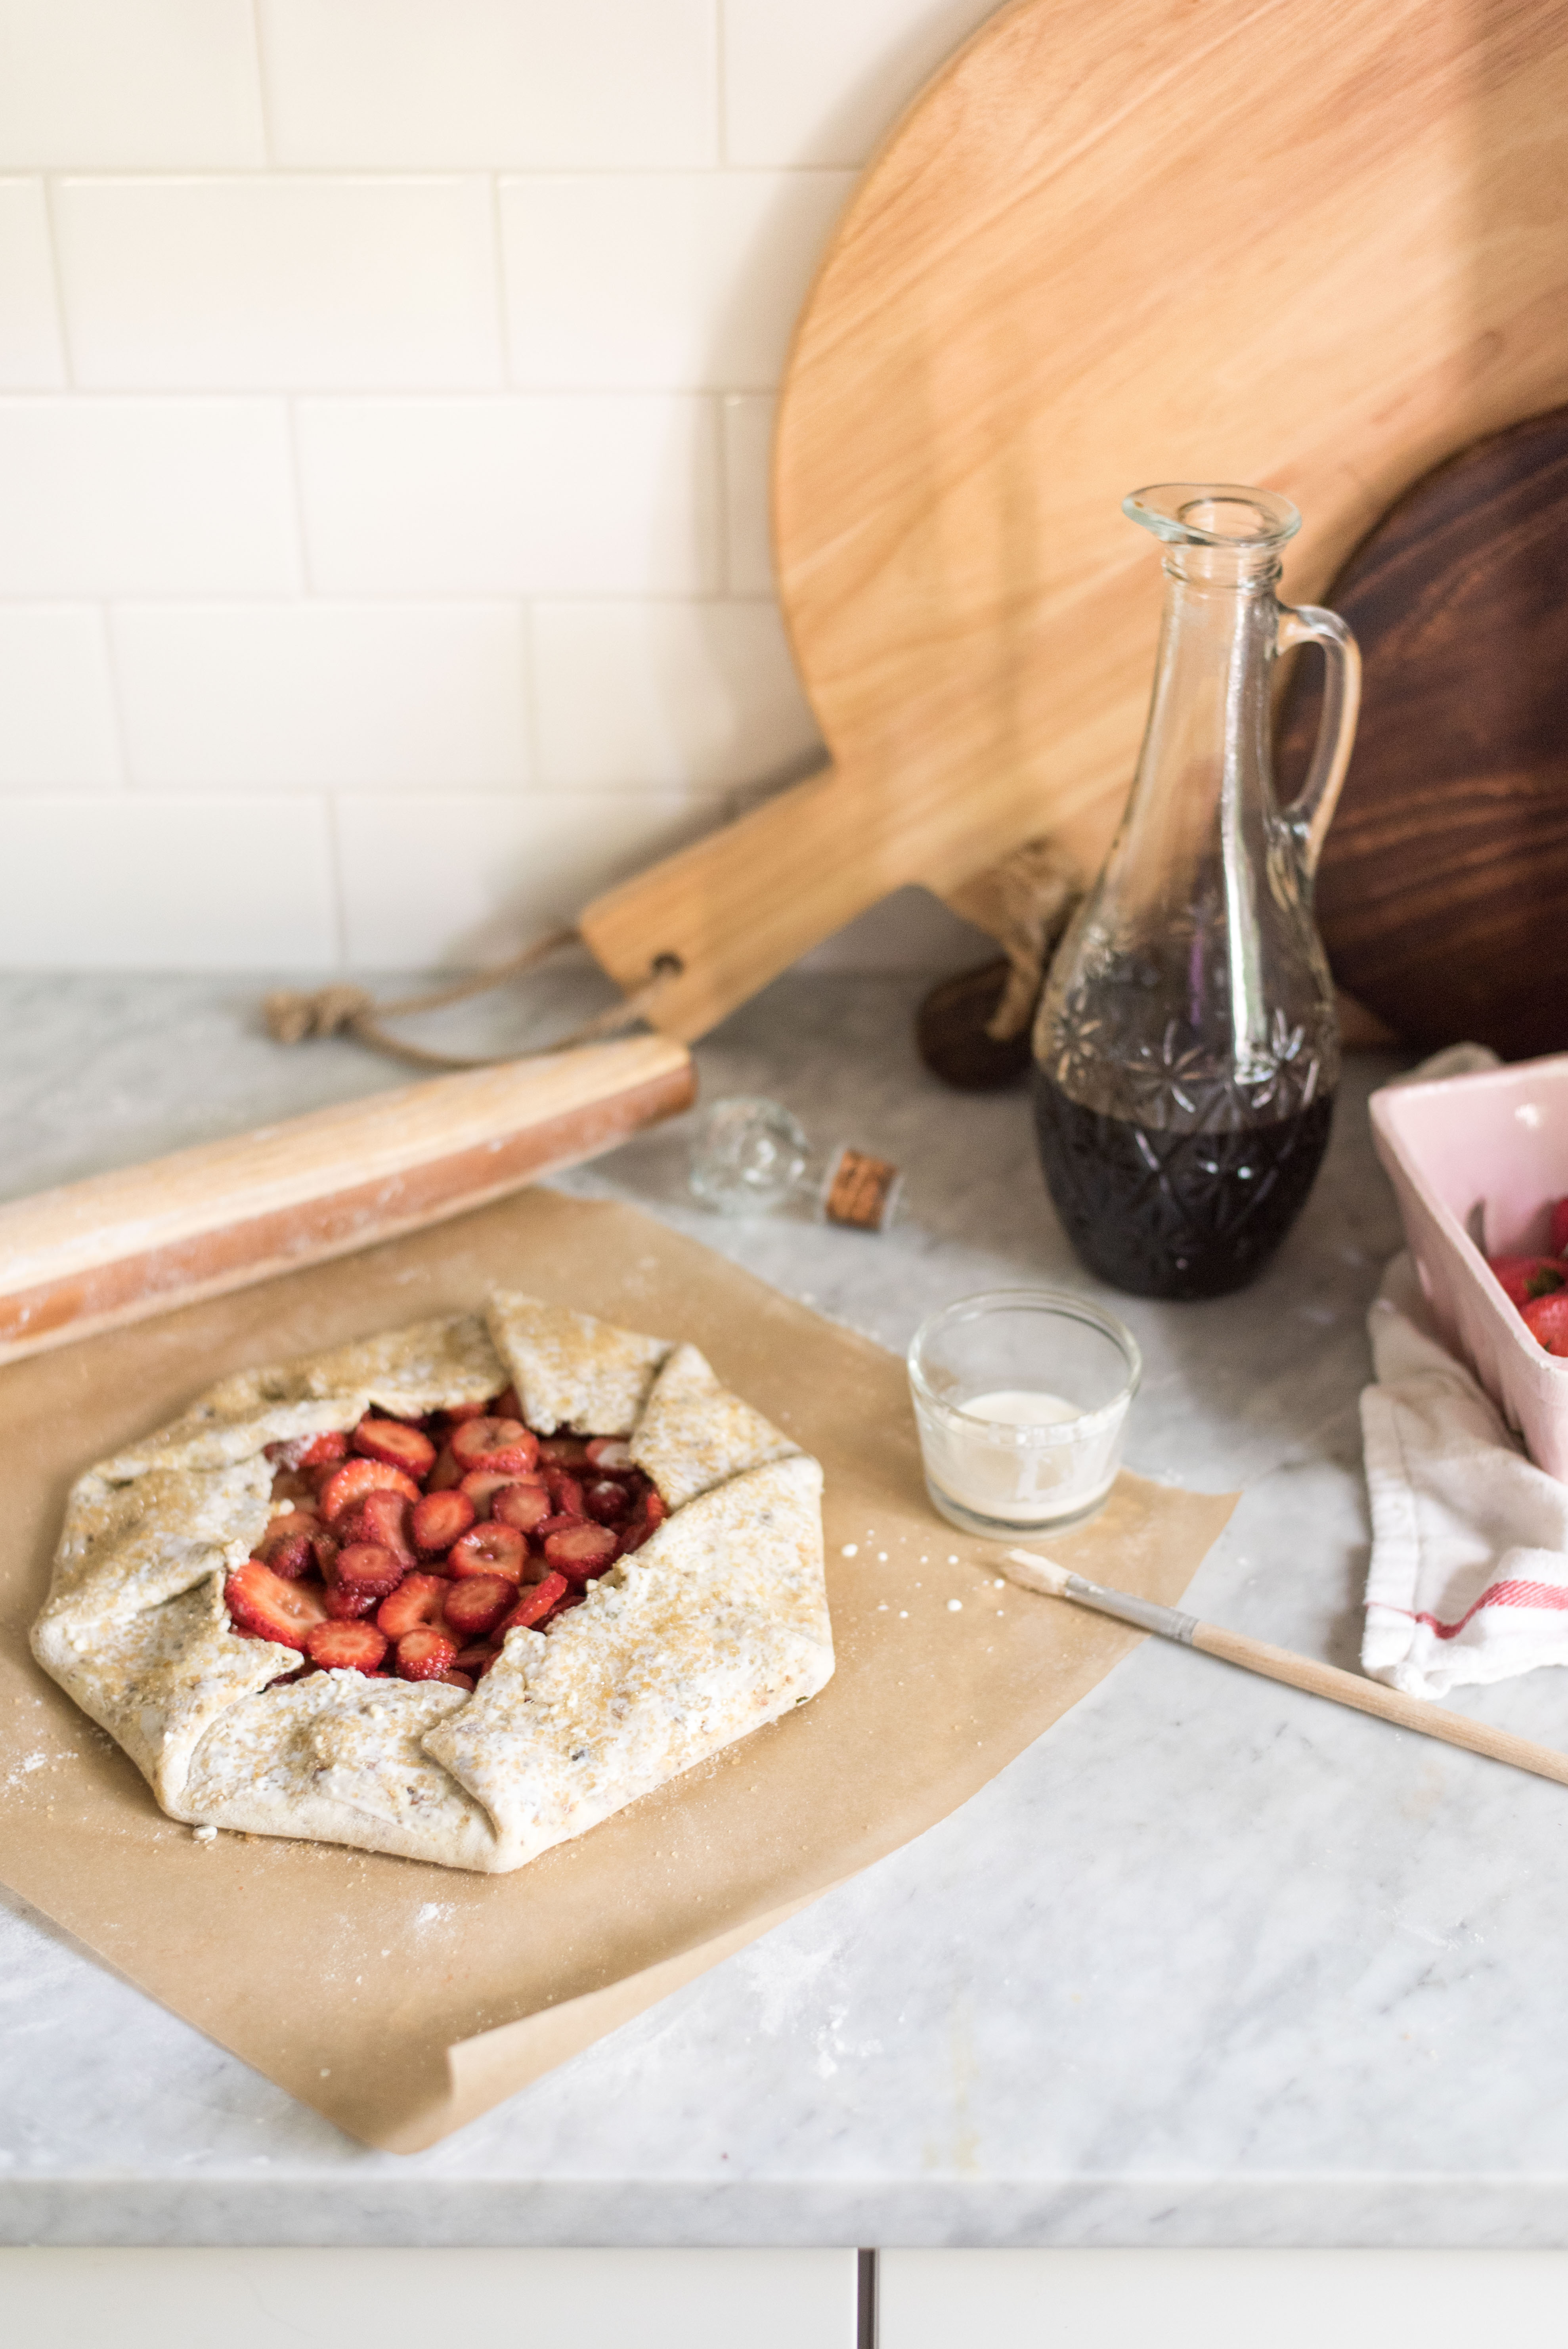 Strawberry Balsamic Galette with Pistachio Crust